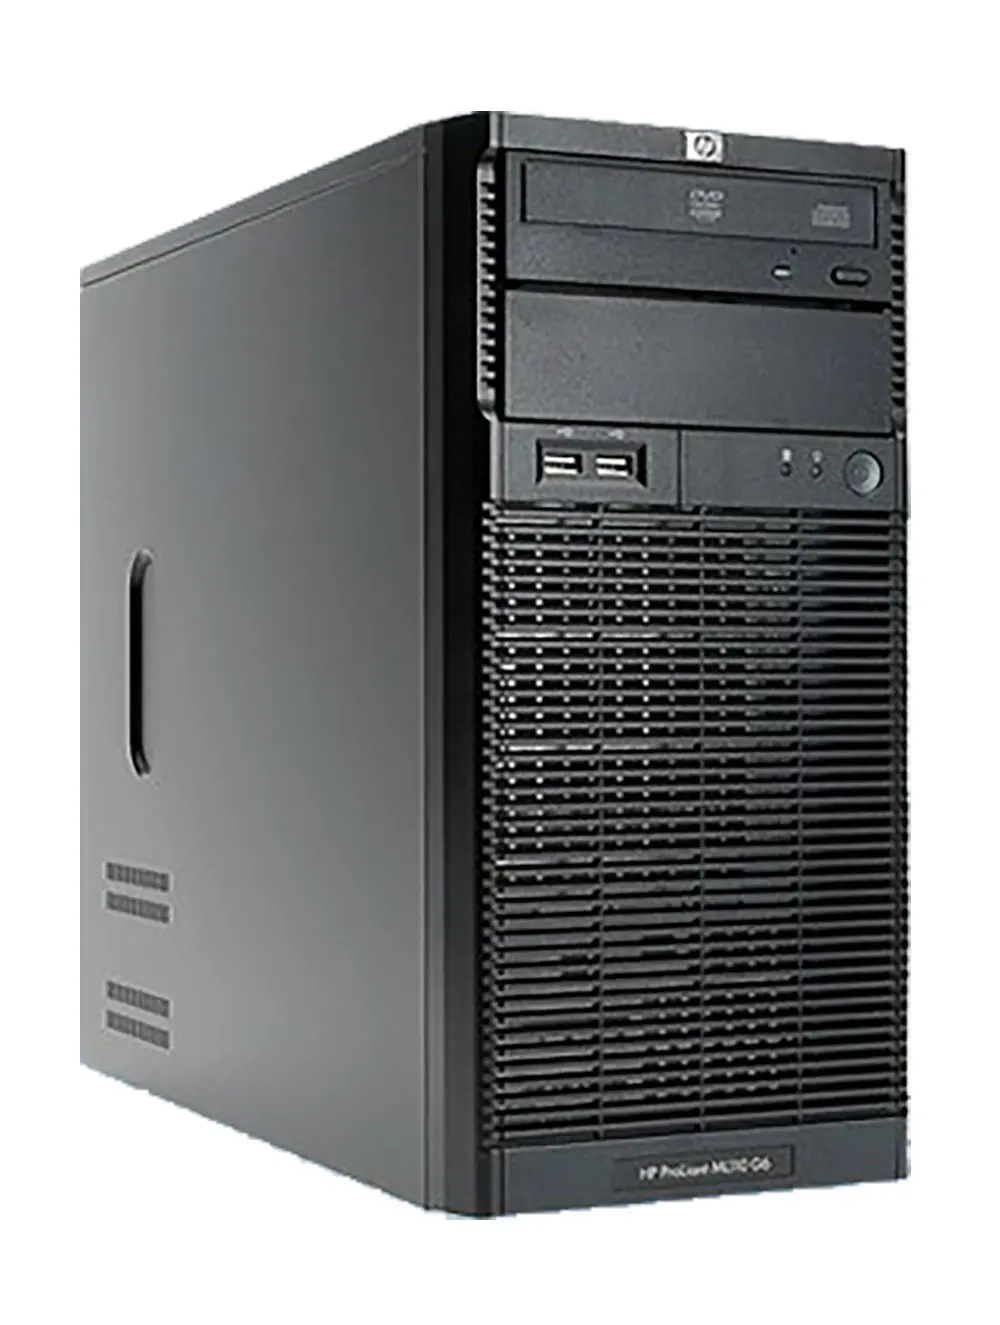 Cheap Server Ml110 Find Server Ml110 Deals On Line At Alibaba Com